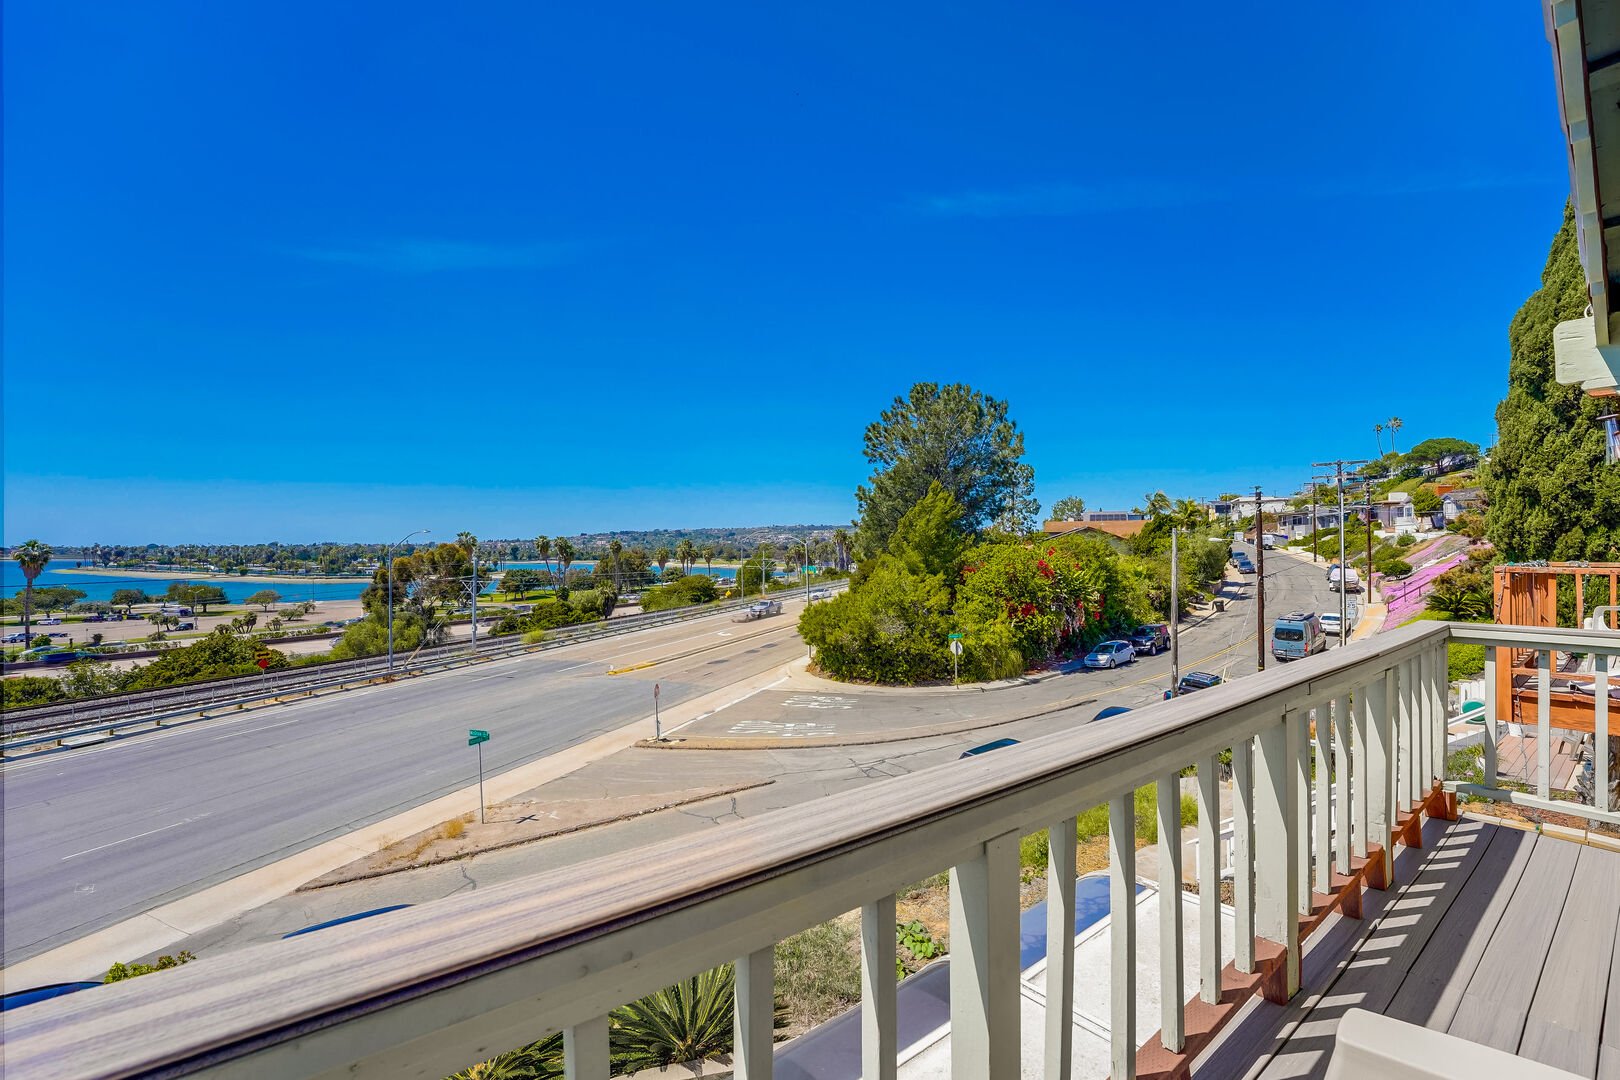 Balcony views of Mission Bay